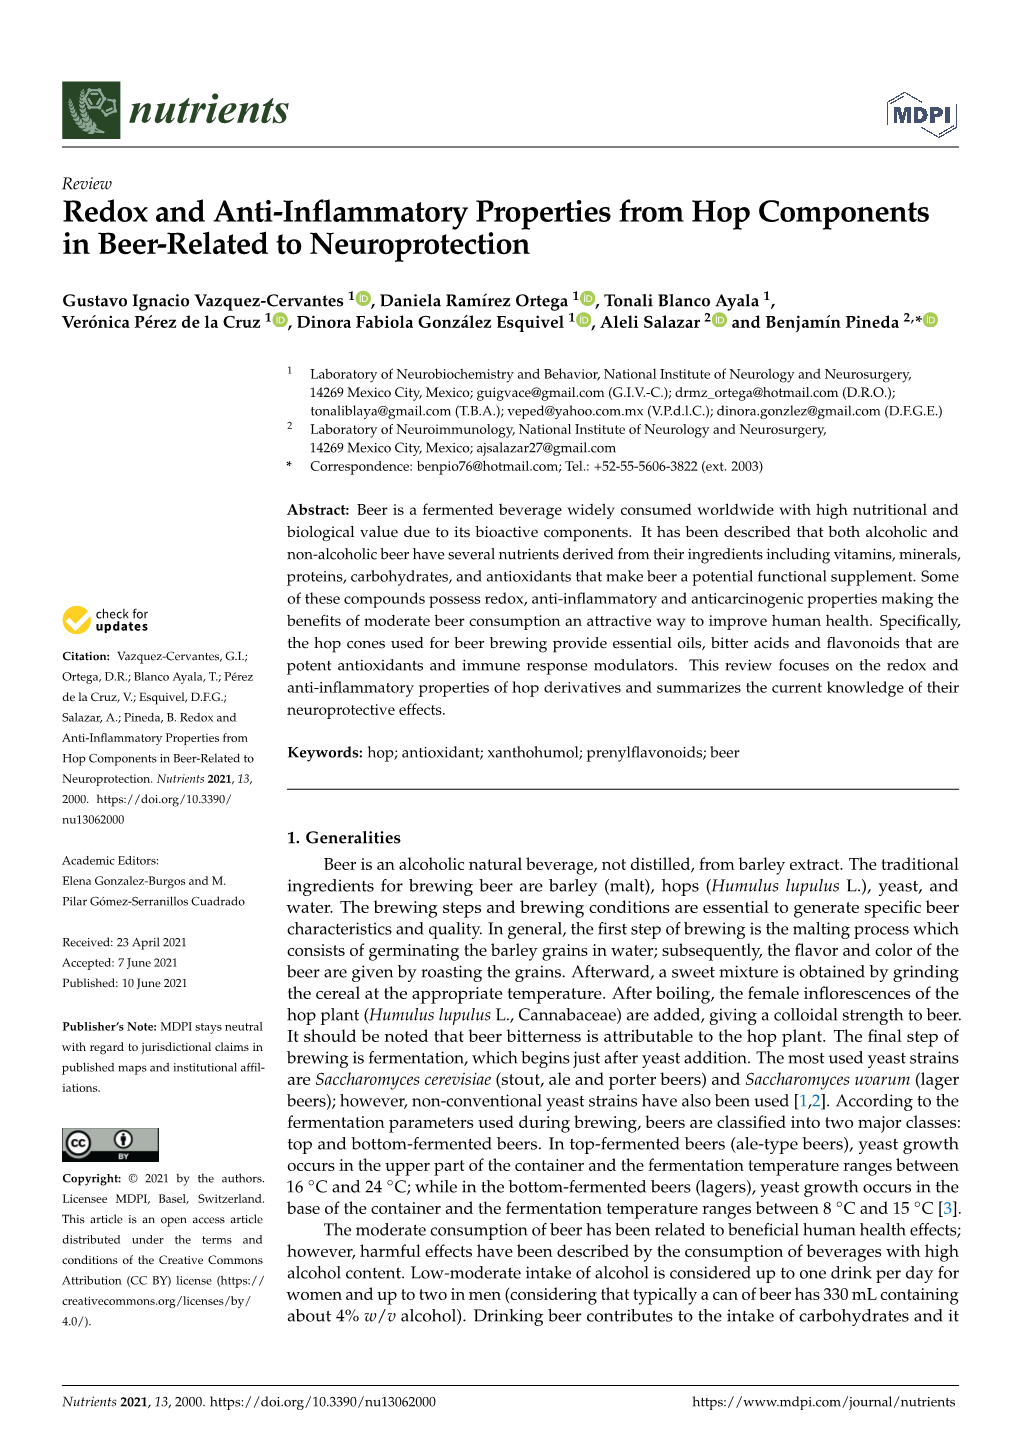 Redox and Anti-Inflammatory Properties from Hop Components in Beer-Related to Neuroprotection